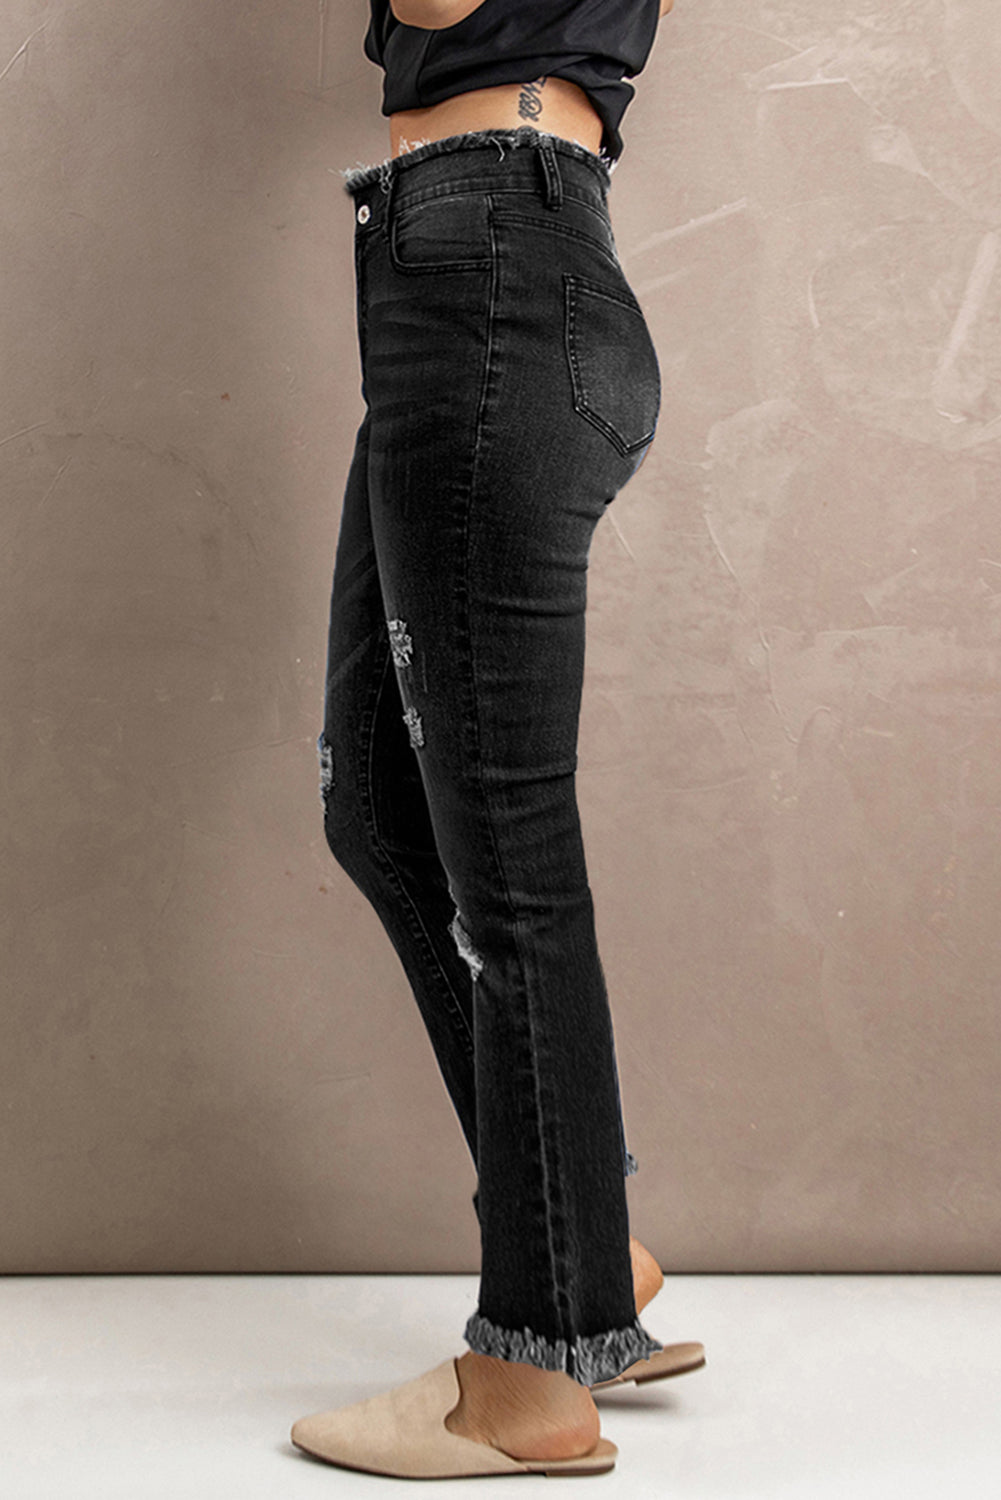 Black Frayed Ripped High Waist Flare Jeans Jeans JT's Designer Fashion